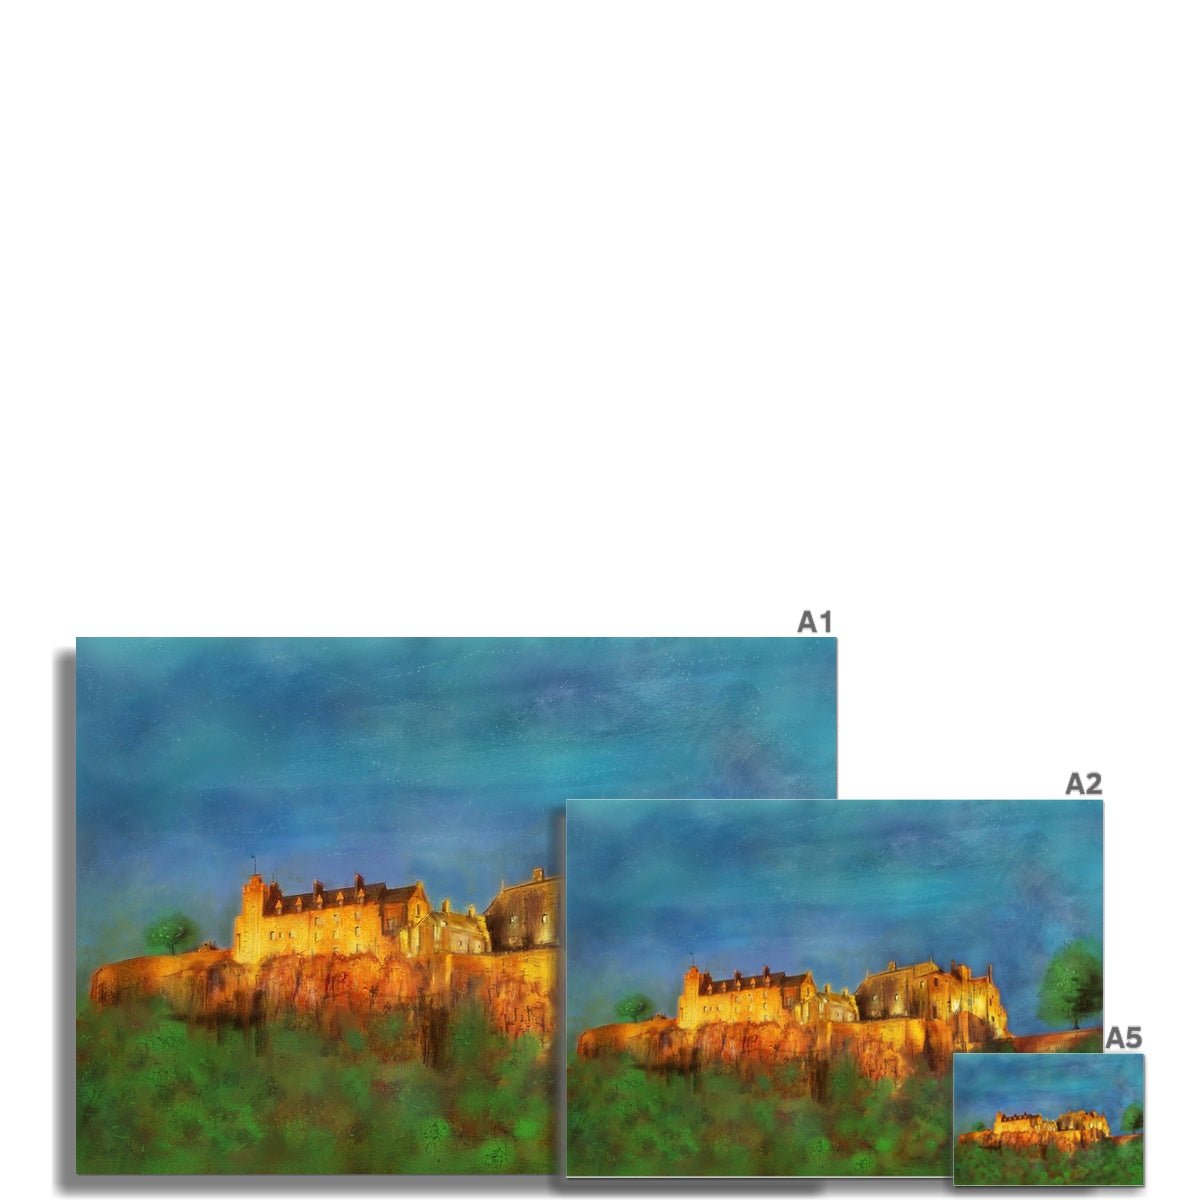 Stirling Castle Painting | Fine Art Prints From Scotland-Unframed Prints-Historic & Iconic Scotland Art Gallery-Paintings, Prints, Homeware, Art Gifts From Scotland By Scottish Artist Kevin Hunter